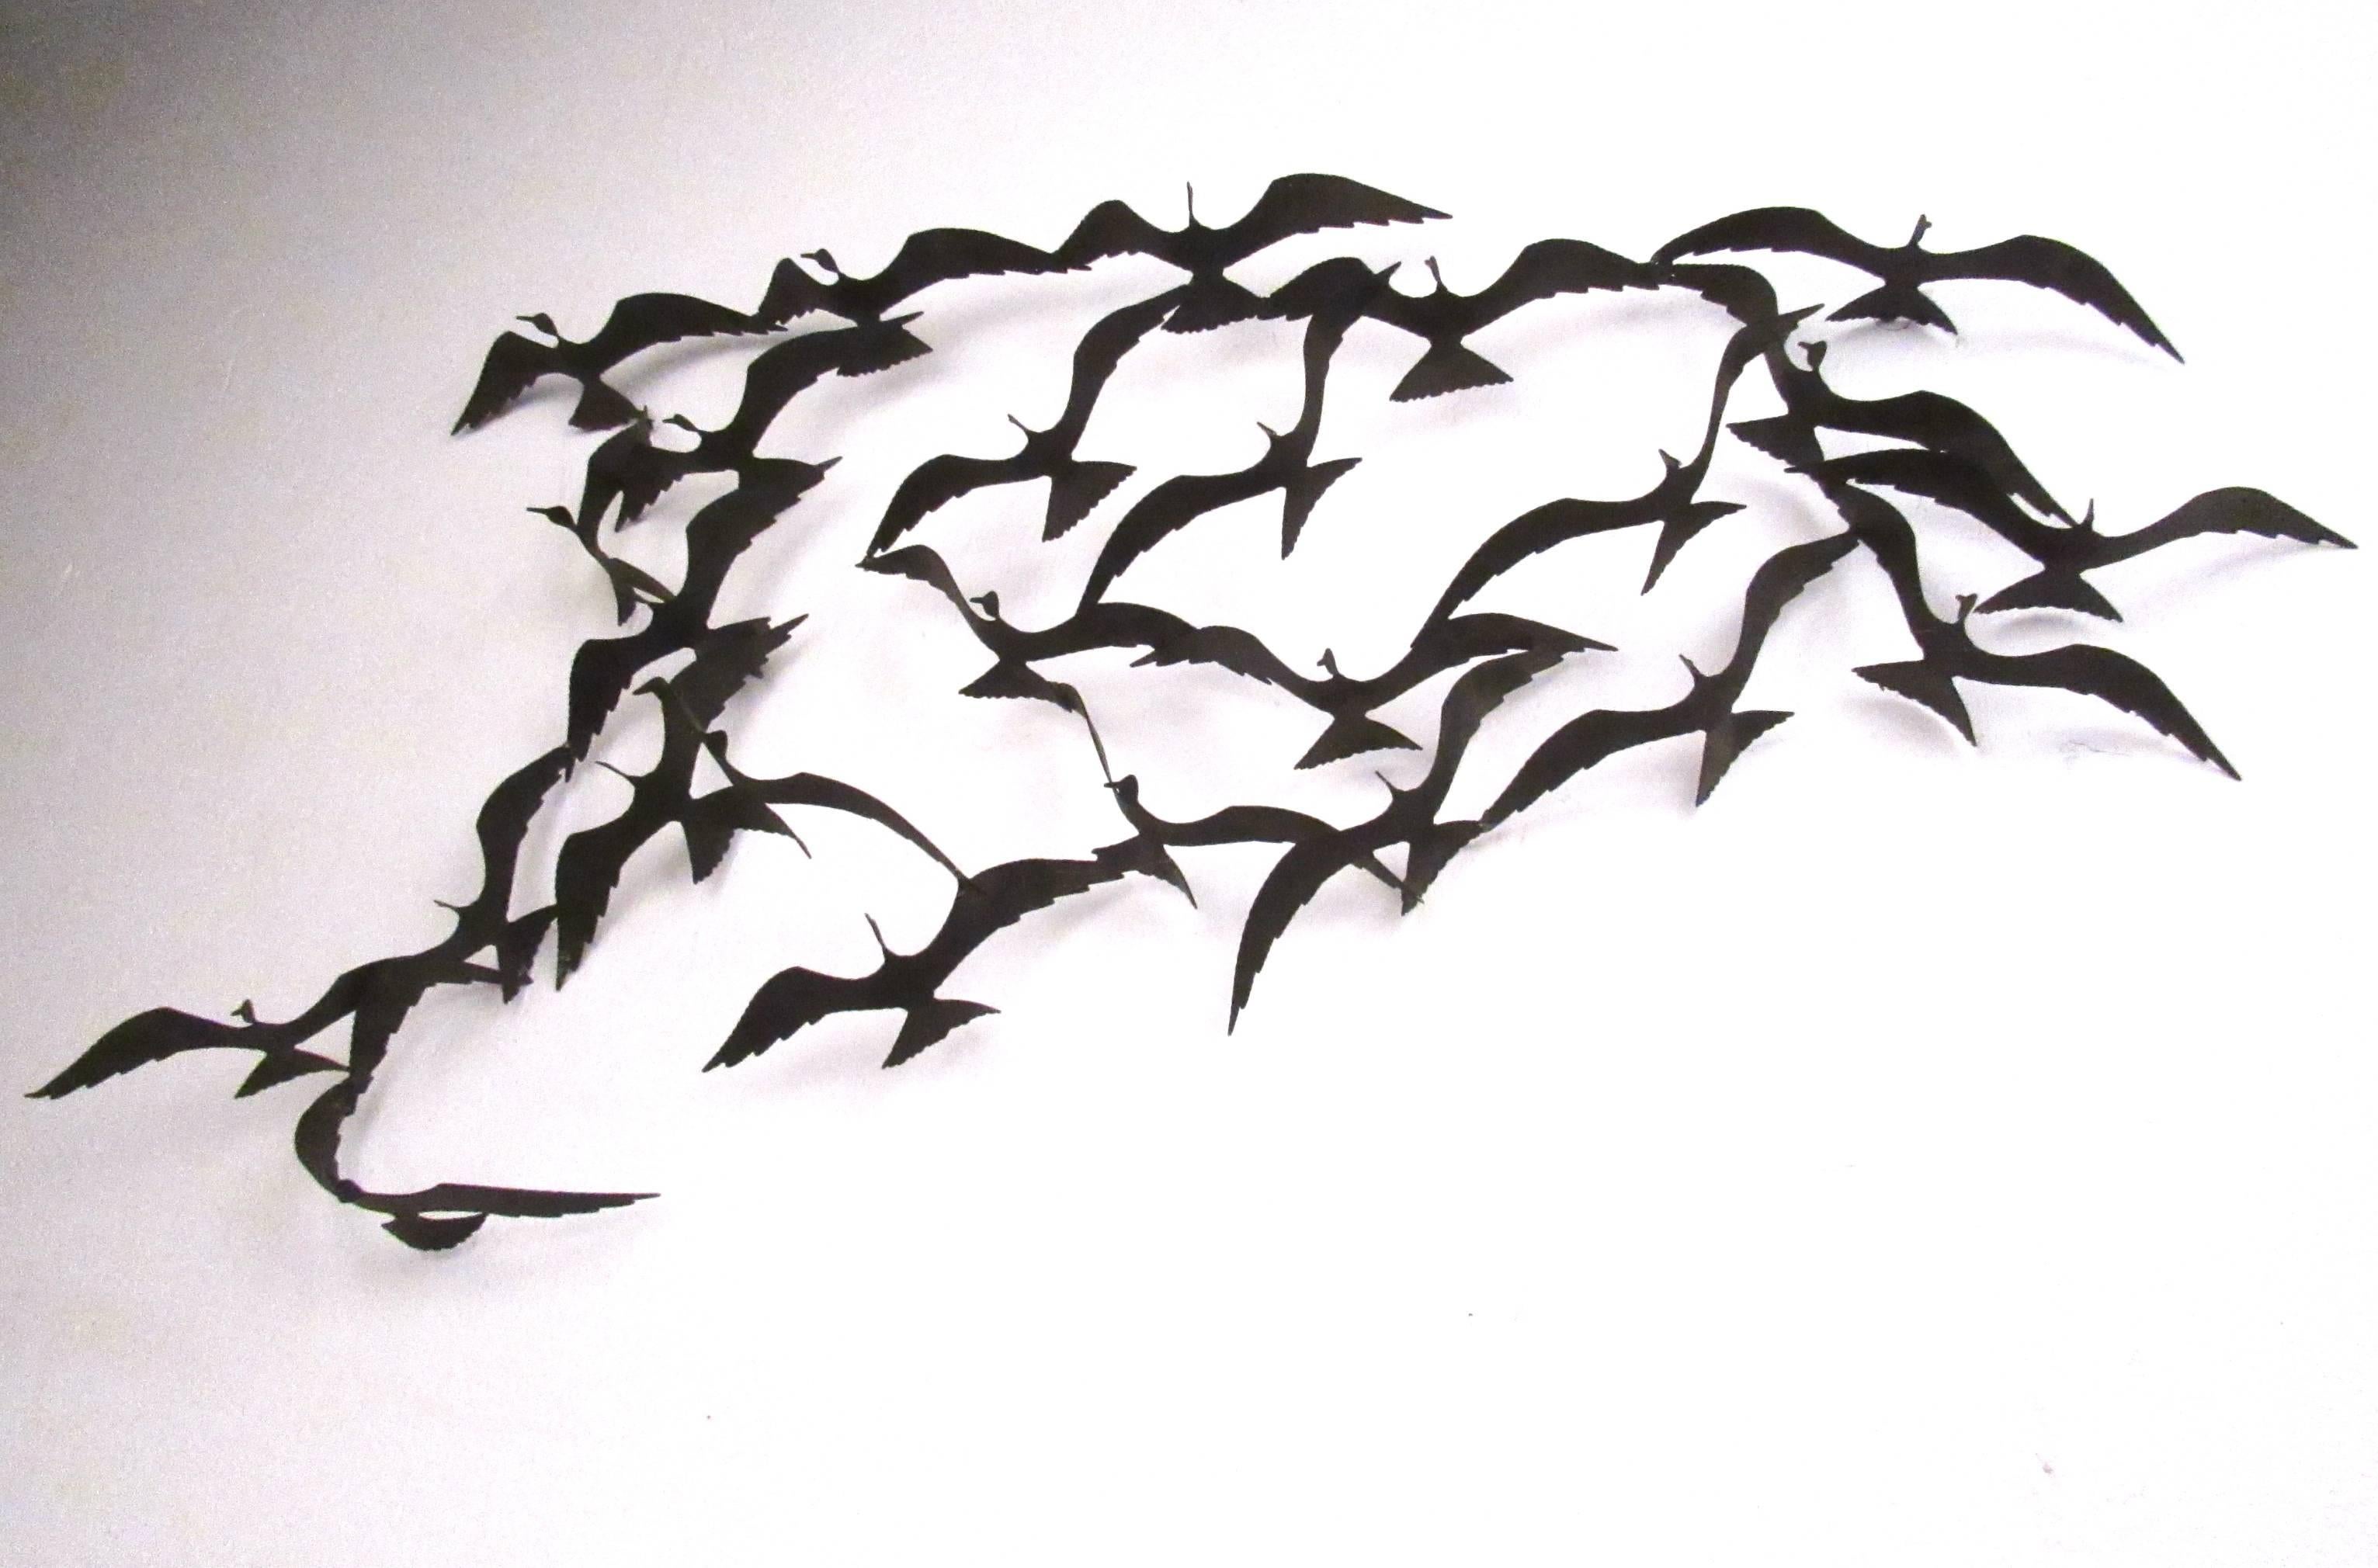 This contemporary modern wall art depicts a flock of flying birds in motion. Vintage style with a whimsical twist, this sculptural metal wall hanging makes a stylish addition to home or office decor. Please confirm item location (NY or NJ).